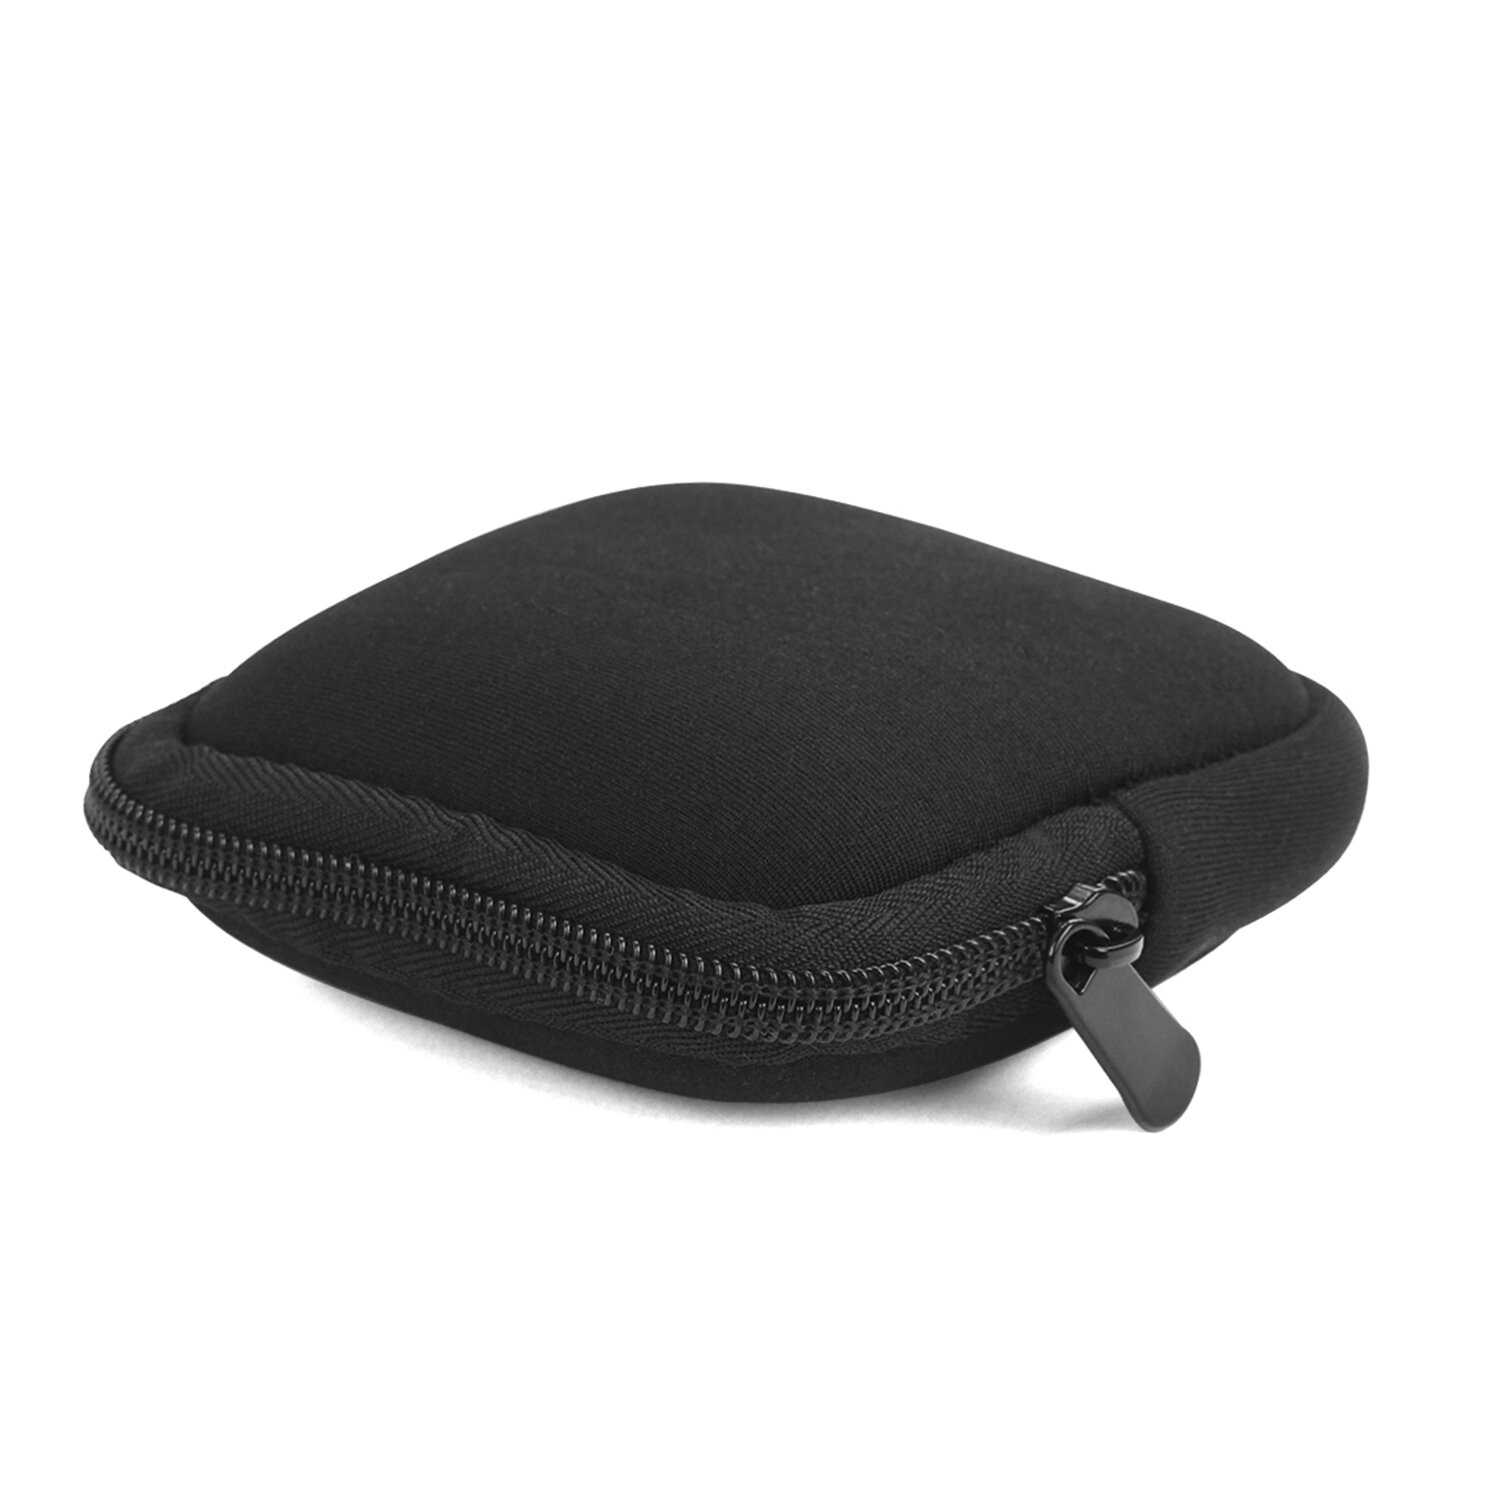 Bakeey Earphone Storage Bag Wireless bluetooth Headset Protective Carrying Case Dustproof Portable S